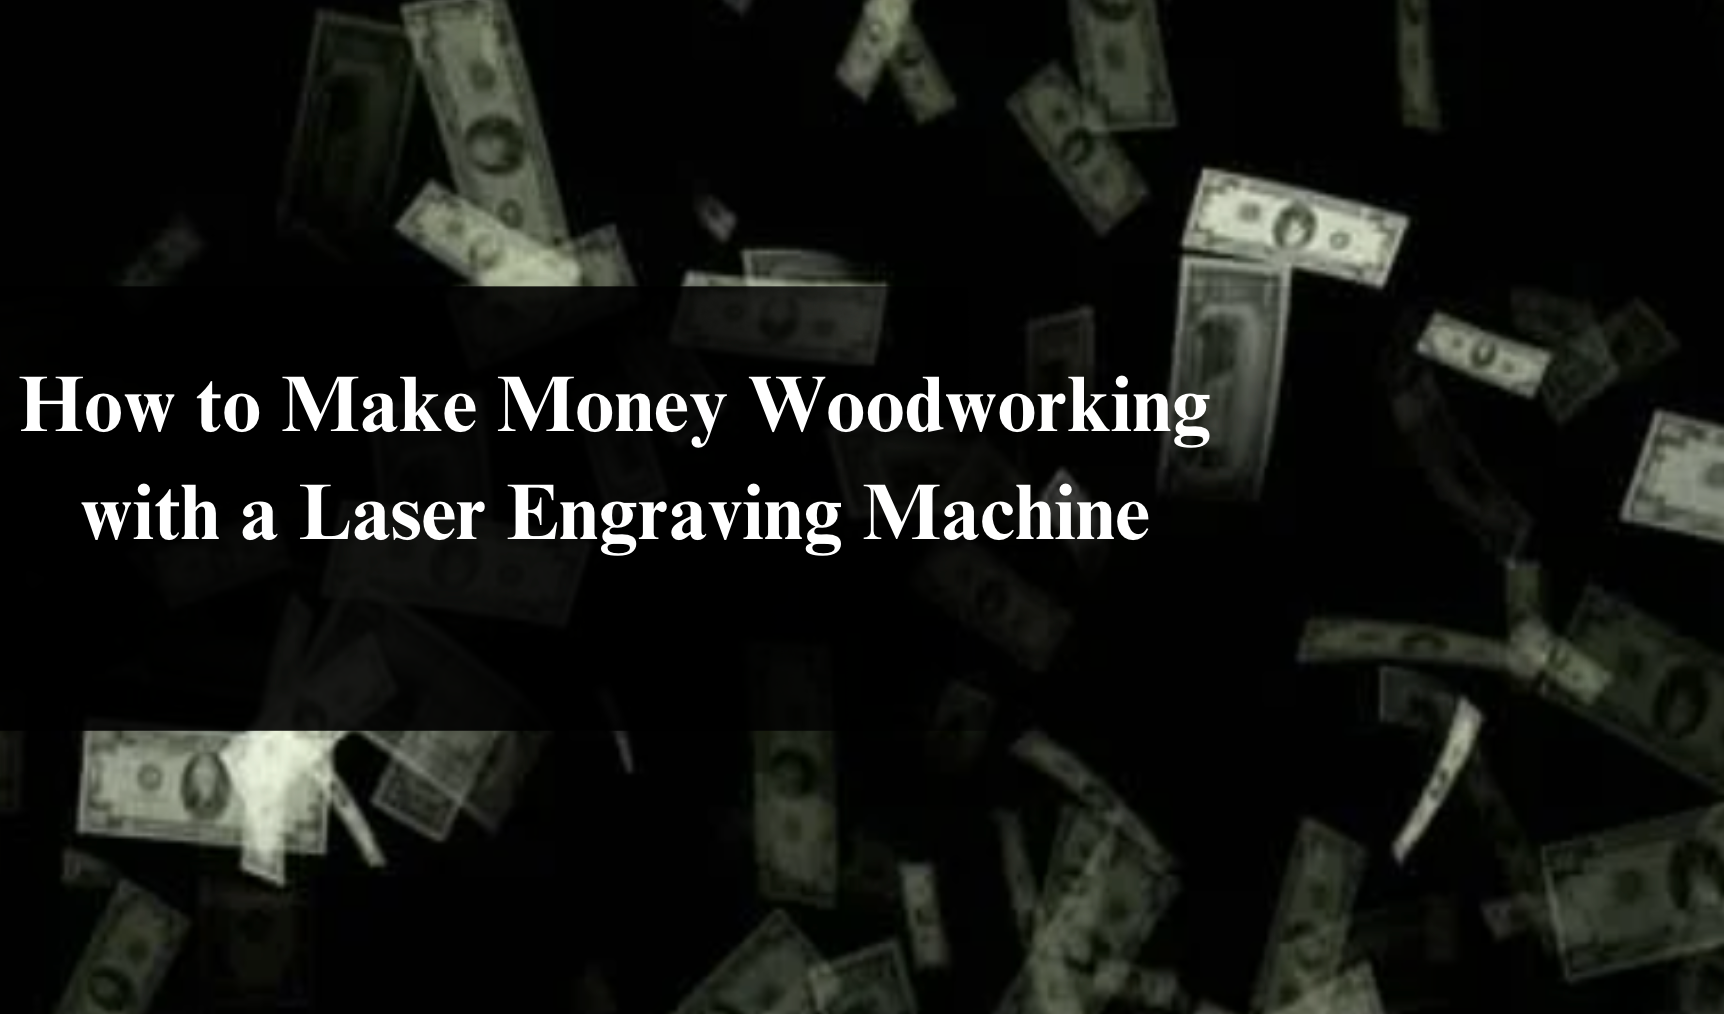 How to Make Money Woodworking with a Laser Engraving Machine